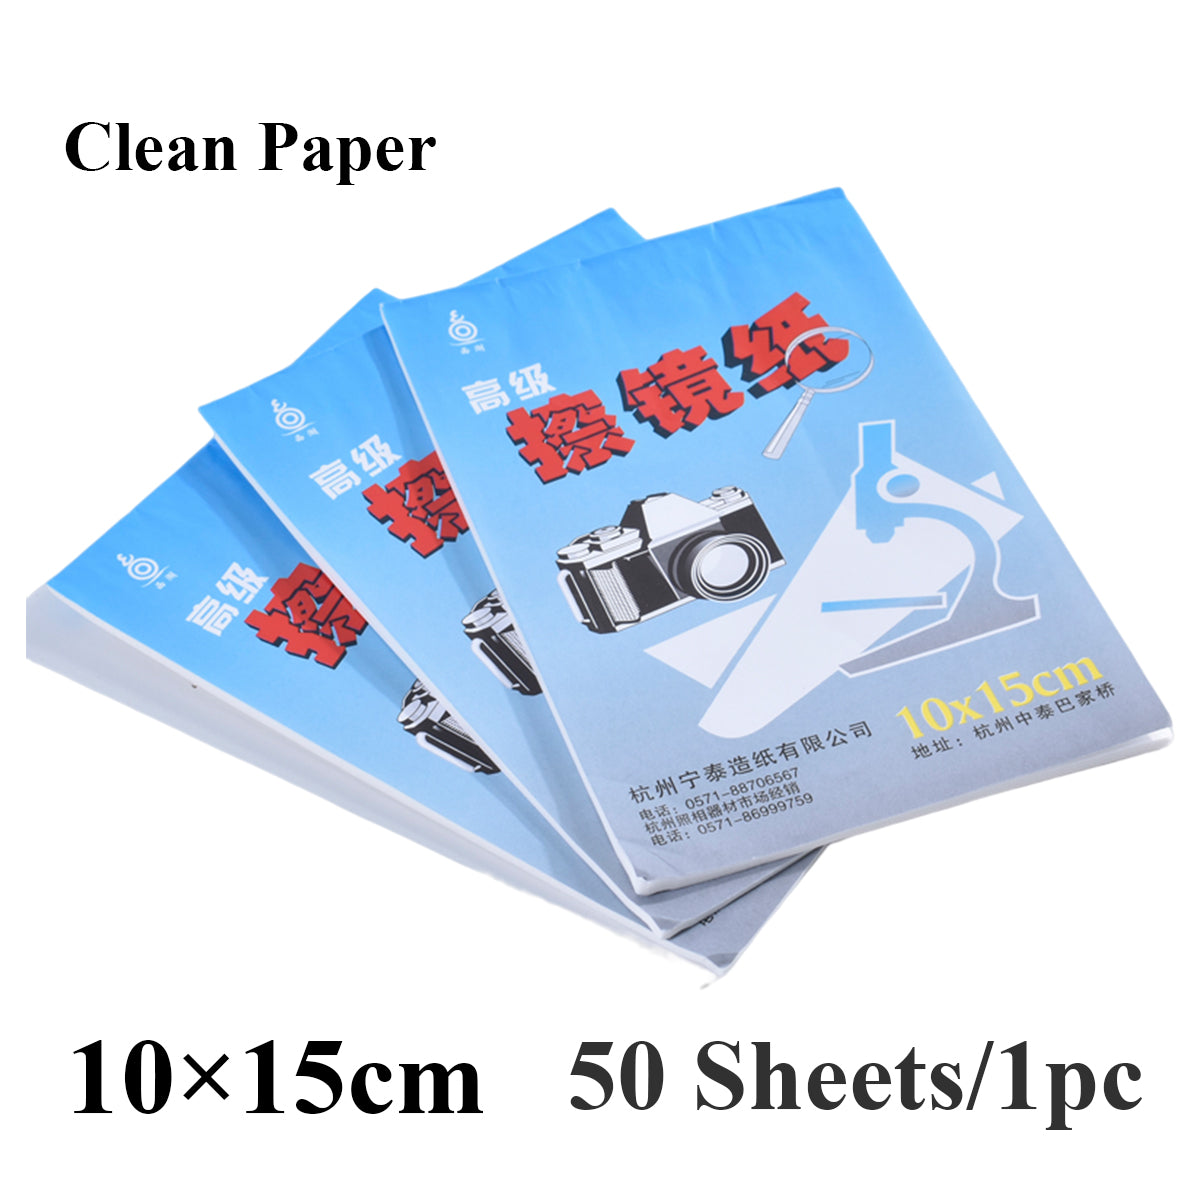 1pc 50 Sheets Optics Lens Tissue Clean Paper Soft Cleaning Wipes Booklet For Camera Microscope Laser Filter Glass